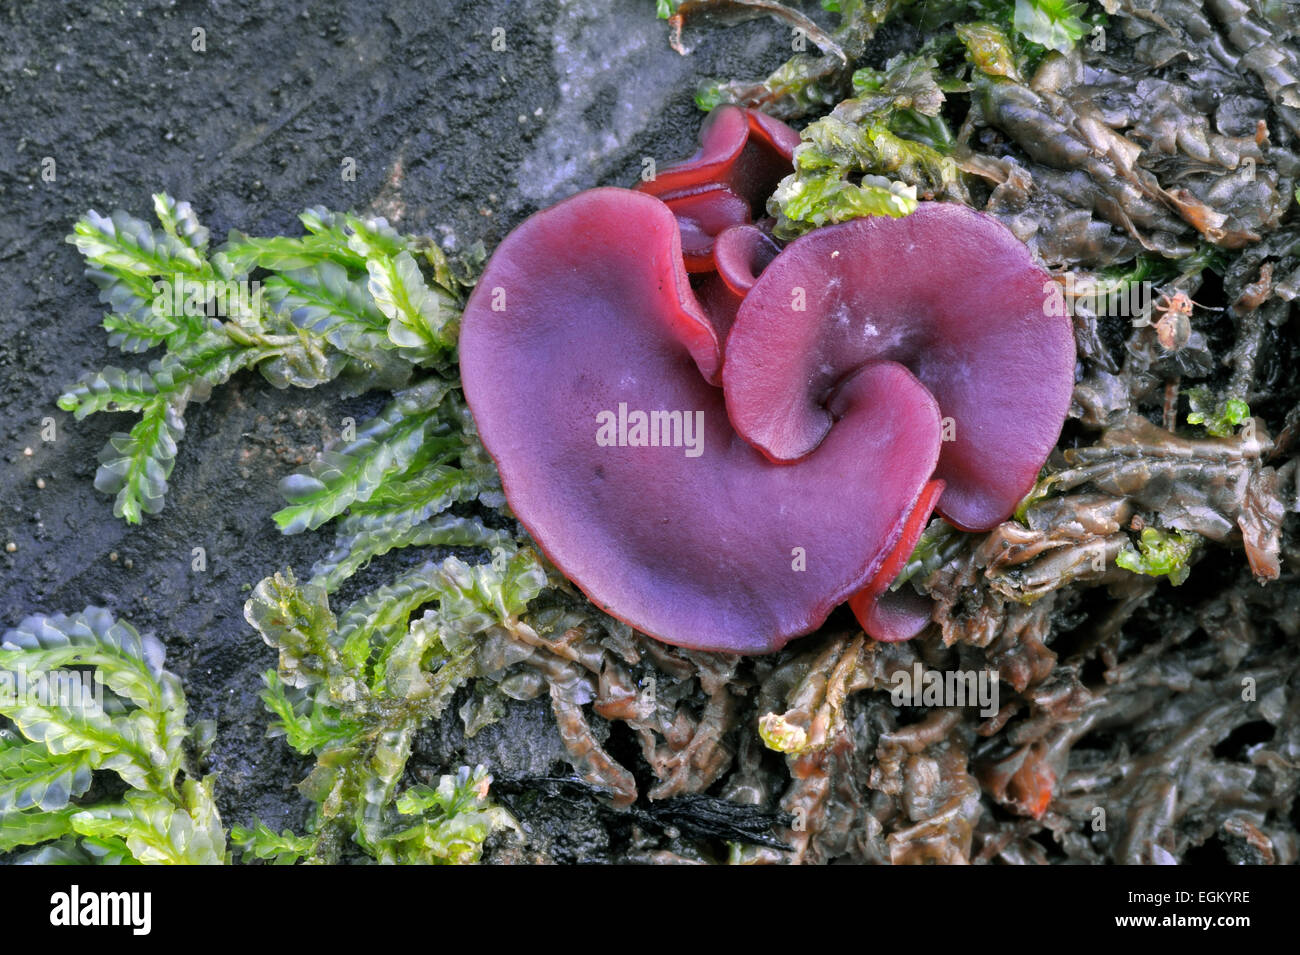 Jelly drops / purple jellydisc (Ascocoryne cylichnium) on decaying wood Stock Photo